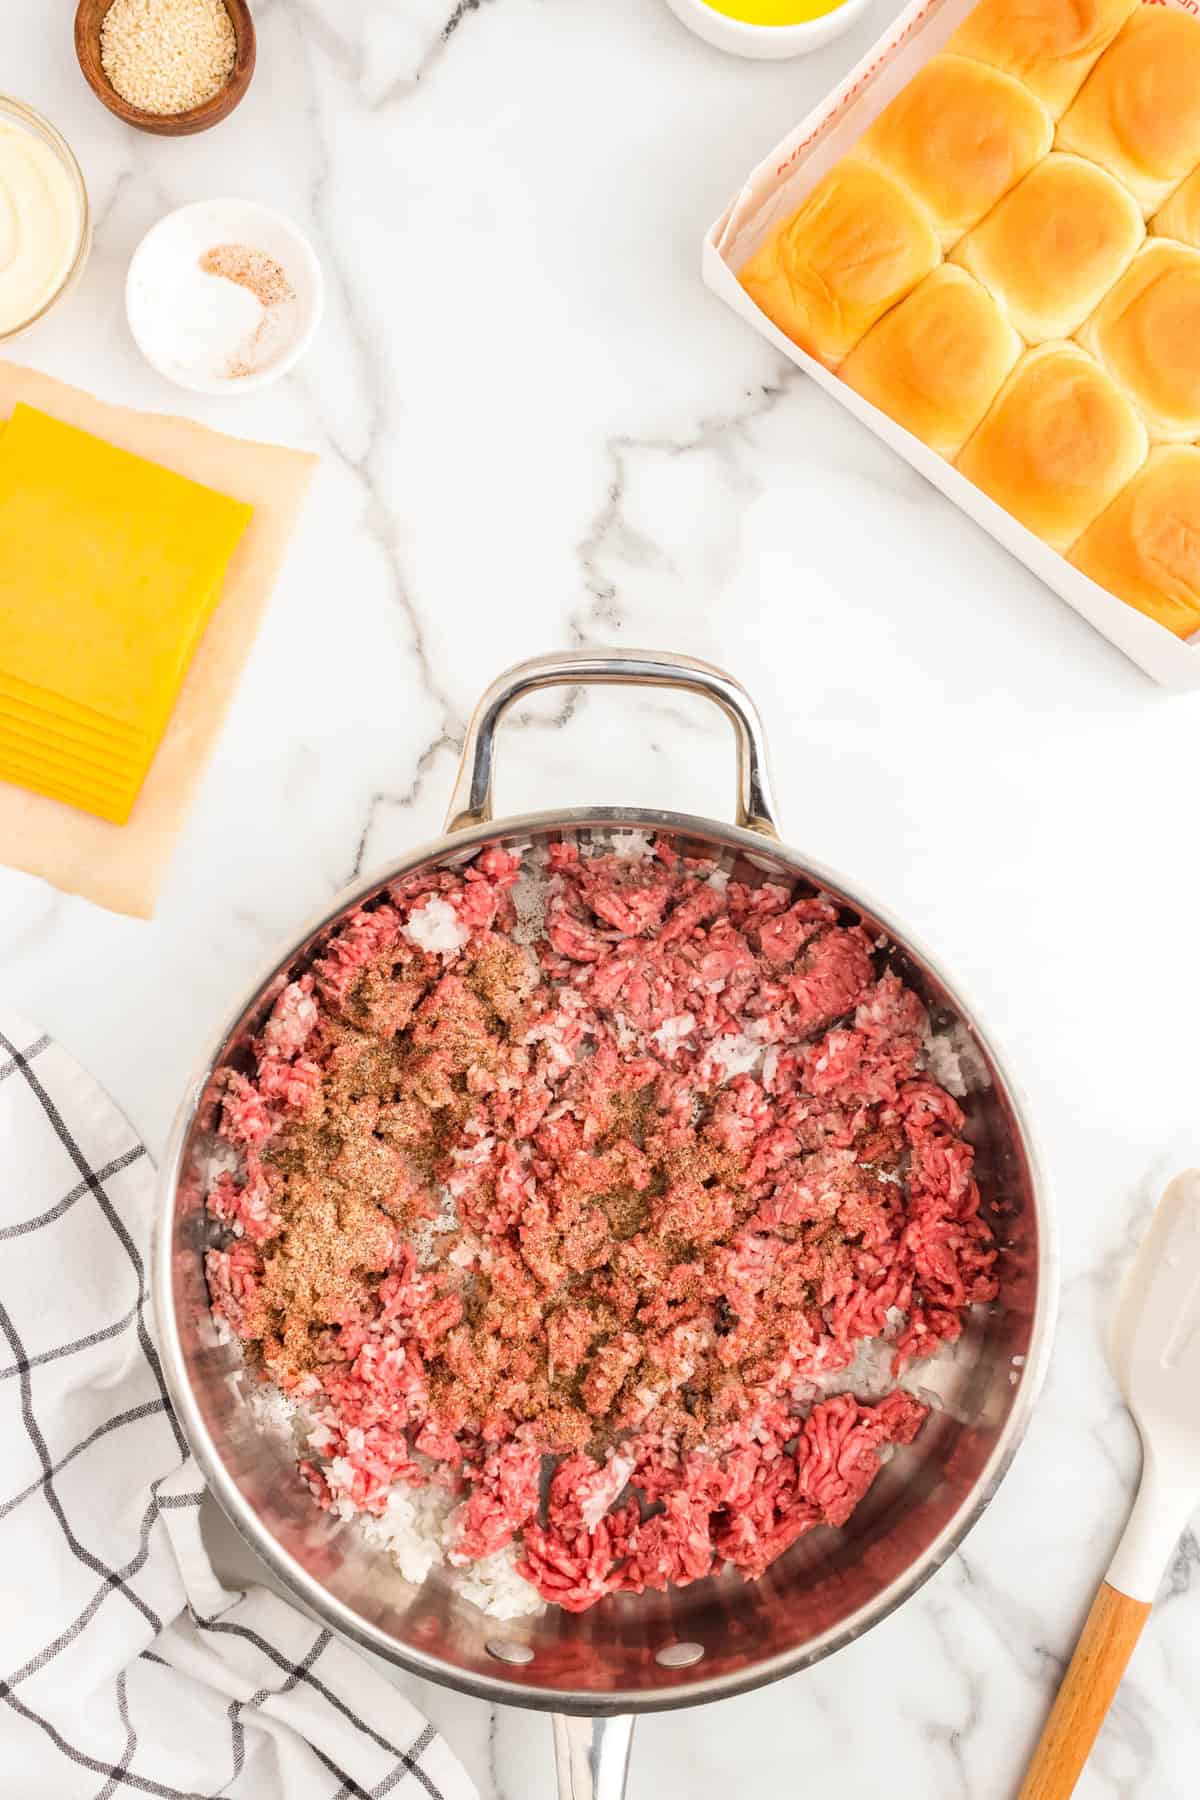 Browning ground beef and seasoning in stovepot skillet for Cheeseburger Sliders recipe